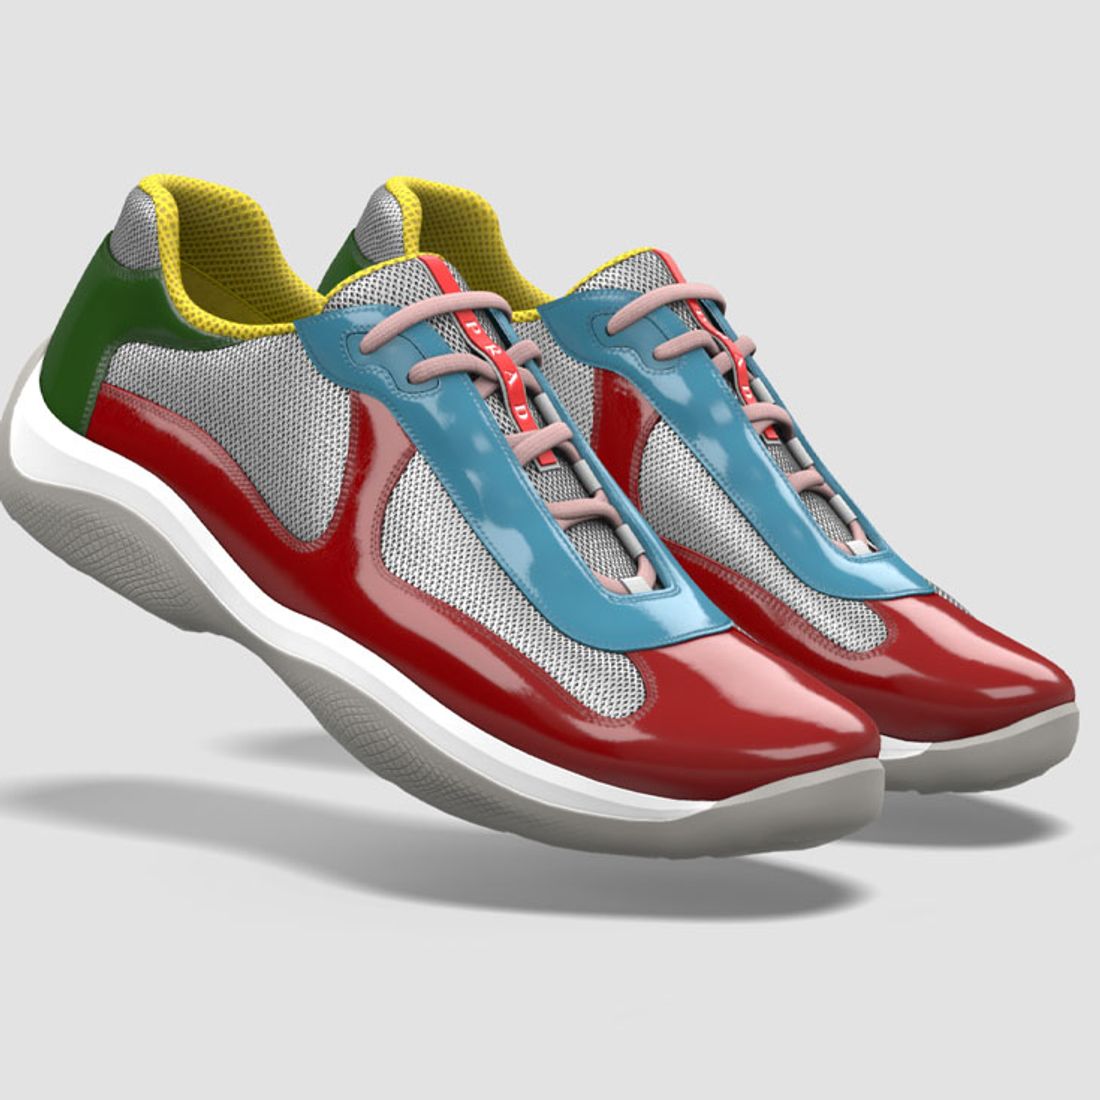 Customise Your Own Prada America's Cup In the AC Factory - Sneaker Freaker